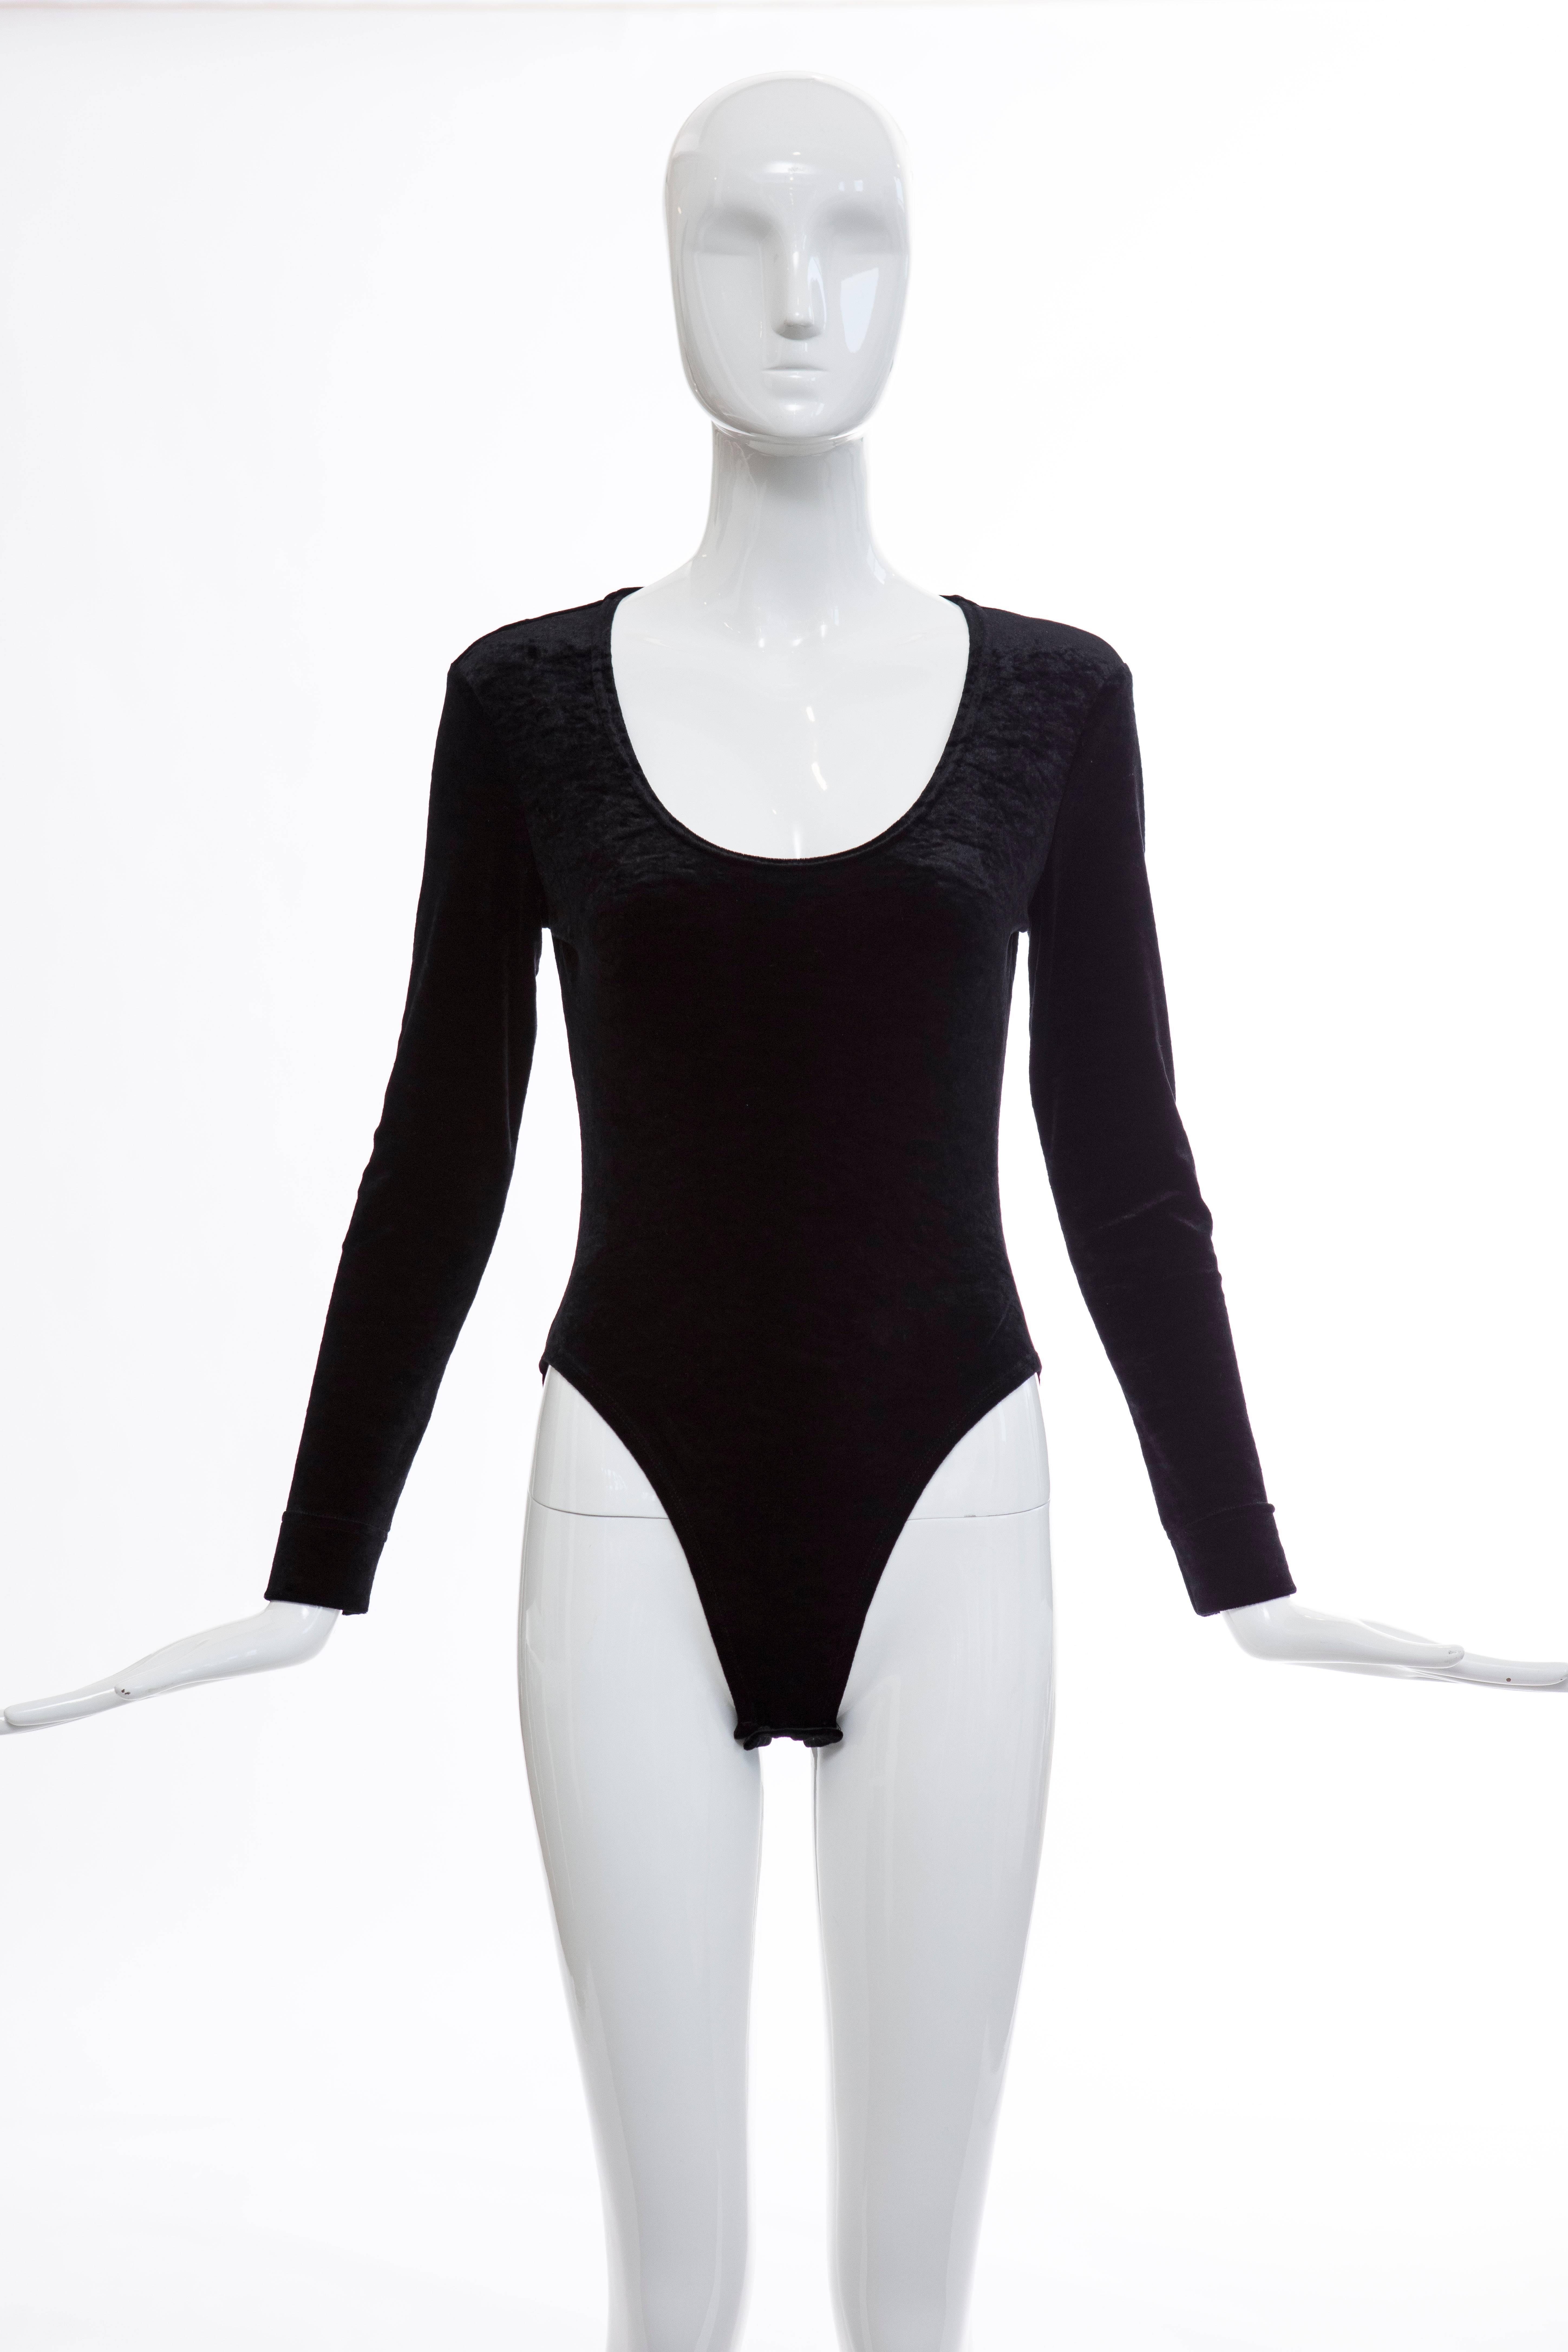 Cheap And Chic by Moschino , early 2000s snap front black nylon spandex velvet bodysuit.

No Size Label

Bust 30" Waist 24", Hips 28" Length 29"